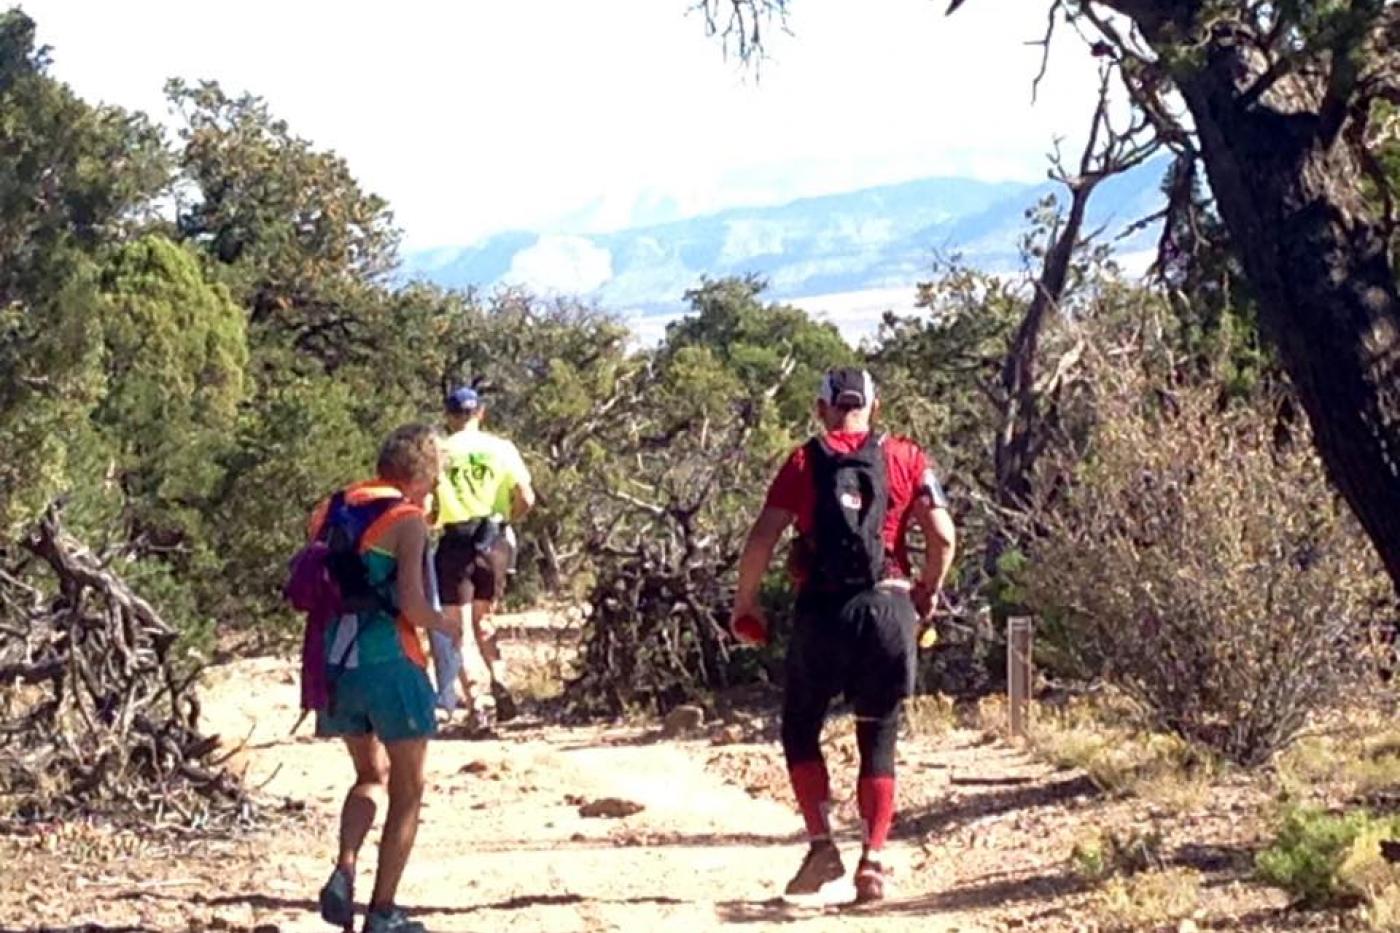 Runners along the trail